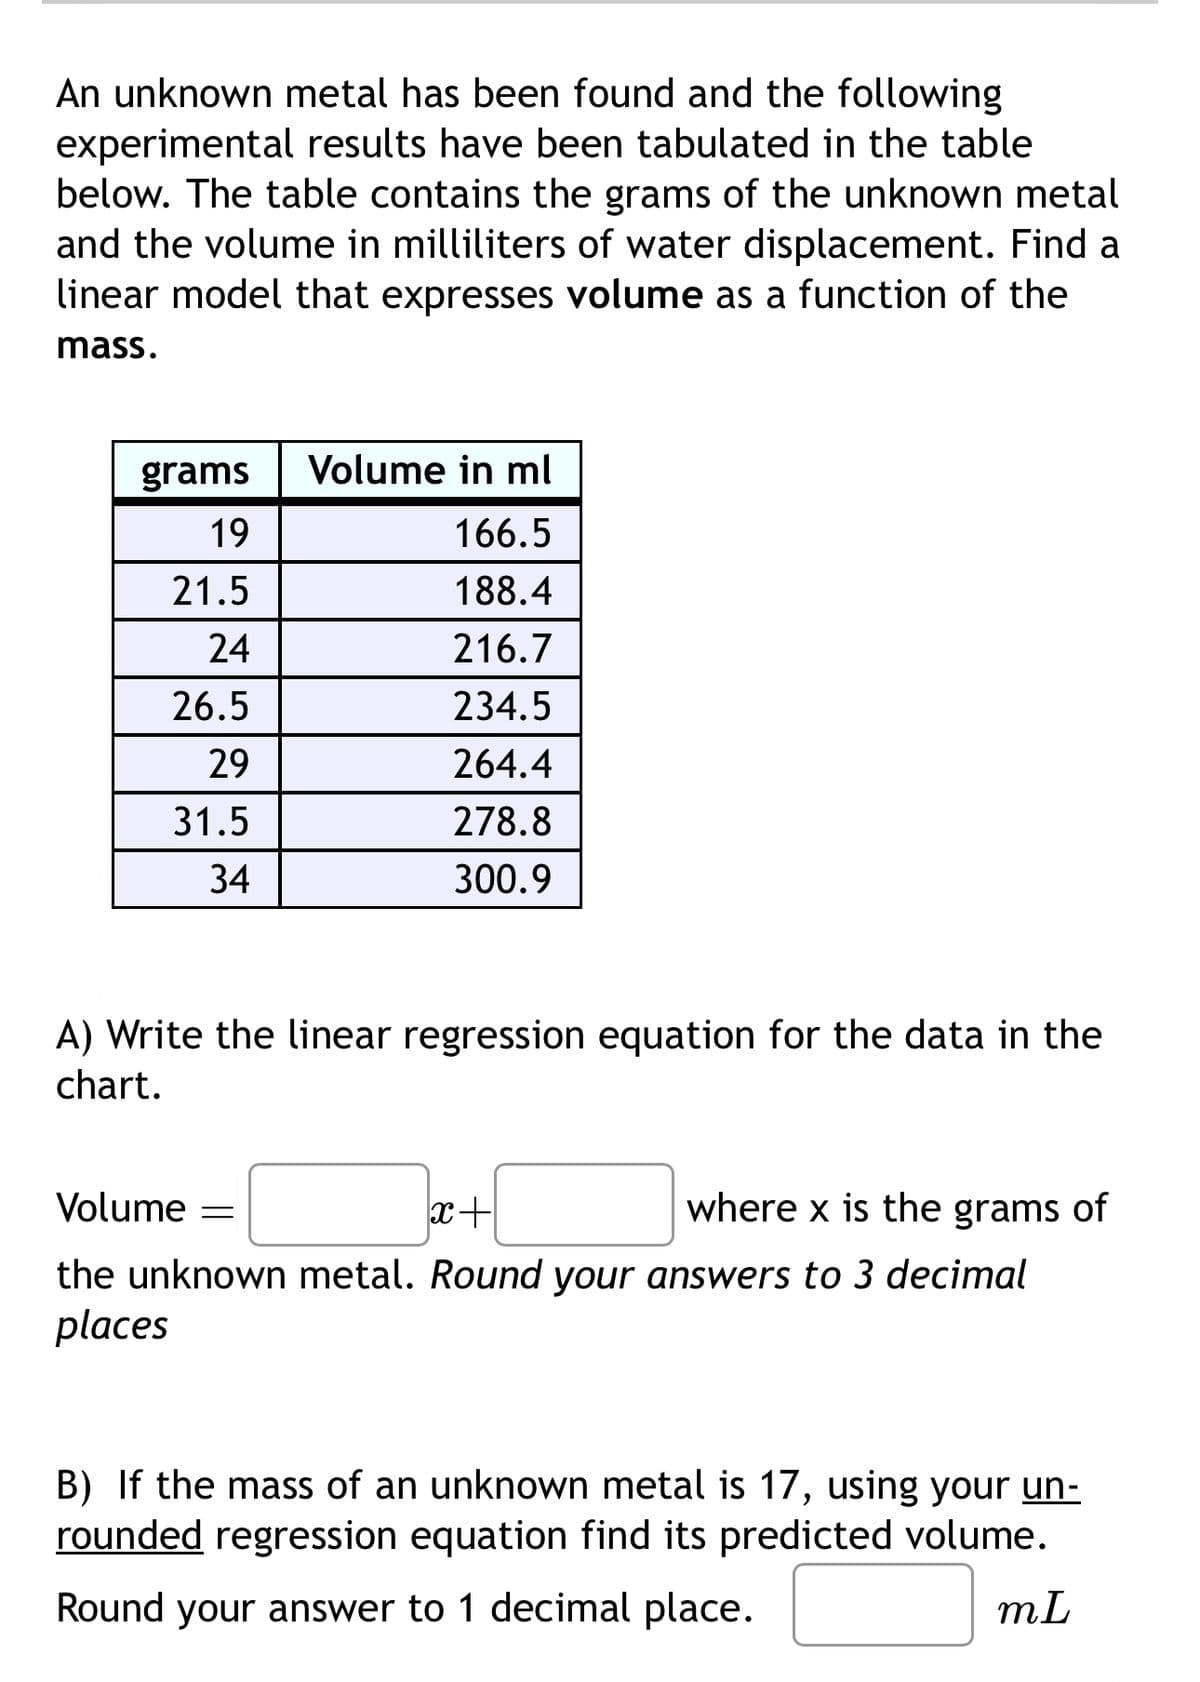 An unknown metal has been found and the following
experimental results have been tabulated in the table
below. The table contains the grams of the unknown metal
and the volume in milliliters of water displacement. Find a
linear model that expresses volume as a function of the
mass.
grams
19
Volume in ml
166.5
21.5
188.4
24
216.7
26.5
234.5
29
264.4
31.5
278.8
34
300.9
A) Write the linear regression equation for the data in the
chart.
Volume =
x+
where x is the grams of
the unknown metal. Round your answers to 3 decimal
places
B) If the mass of an unknown metal is 17, using your un-
rounded regression equation find its predicted volume.
Round your answer to 1 decimal place.
mL